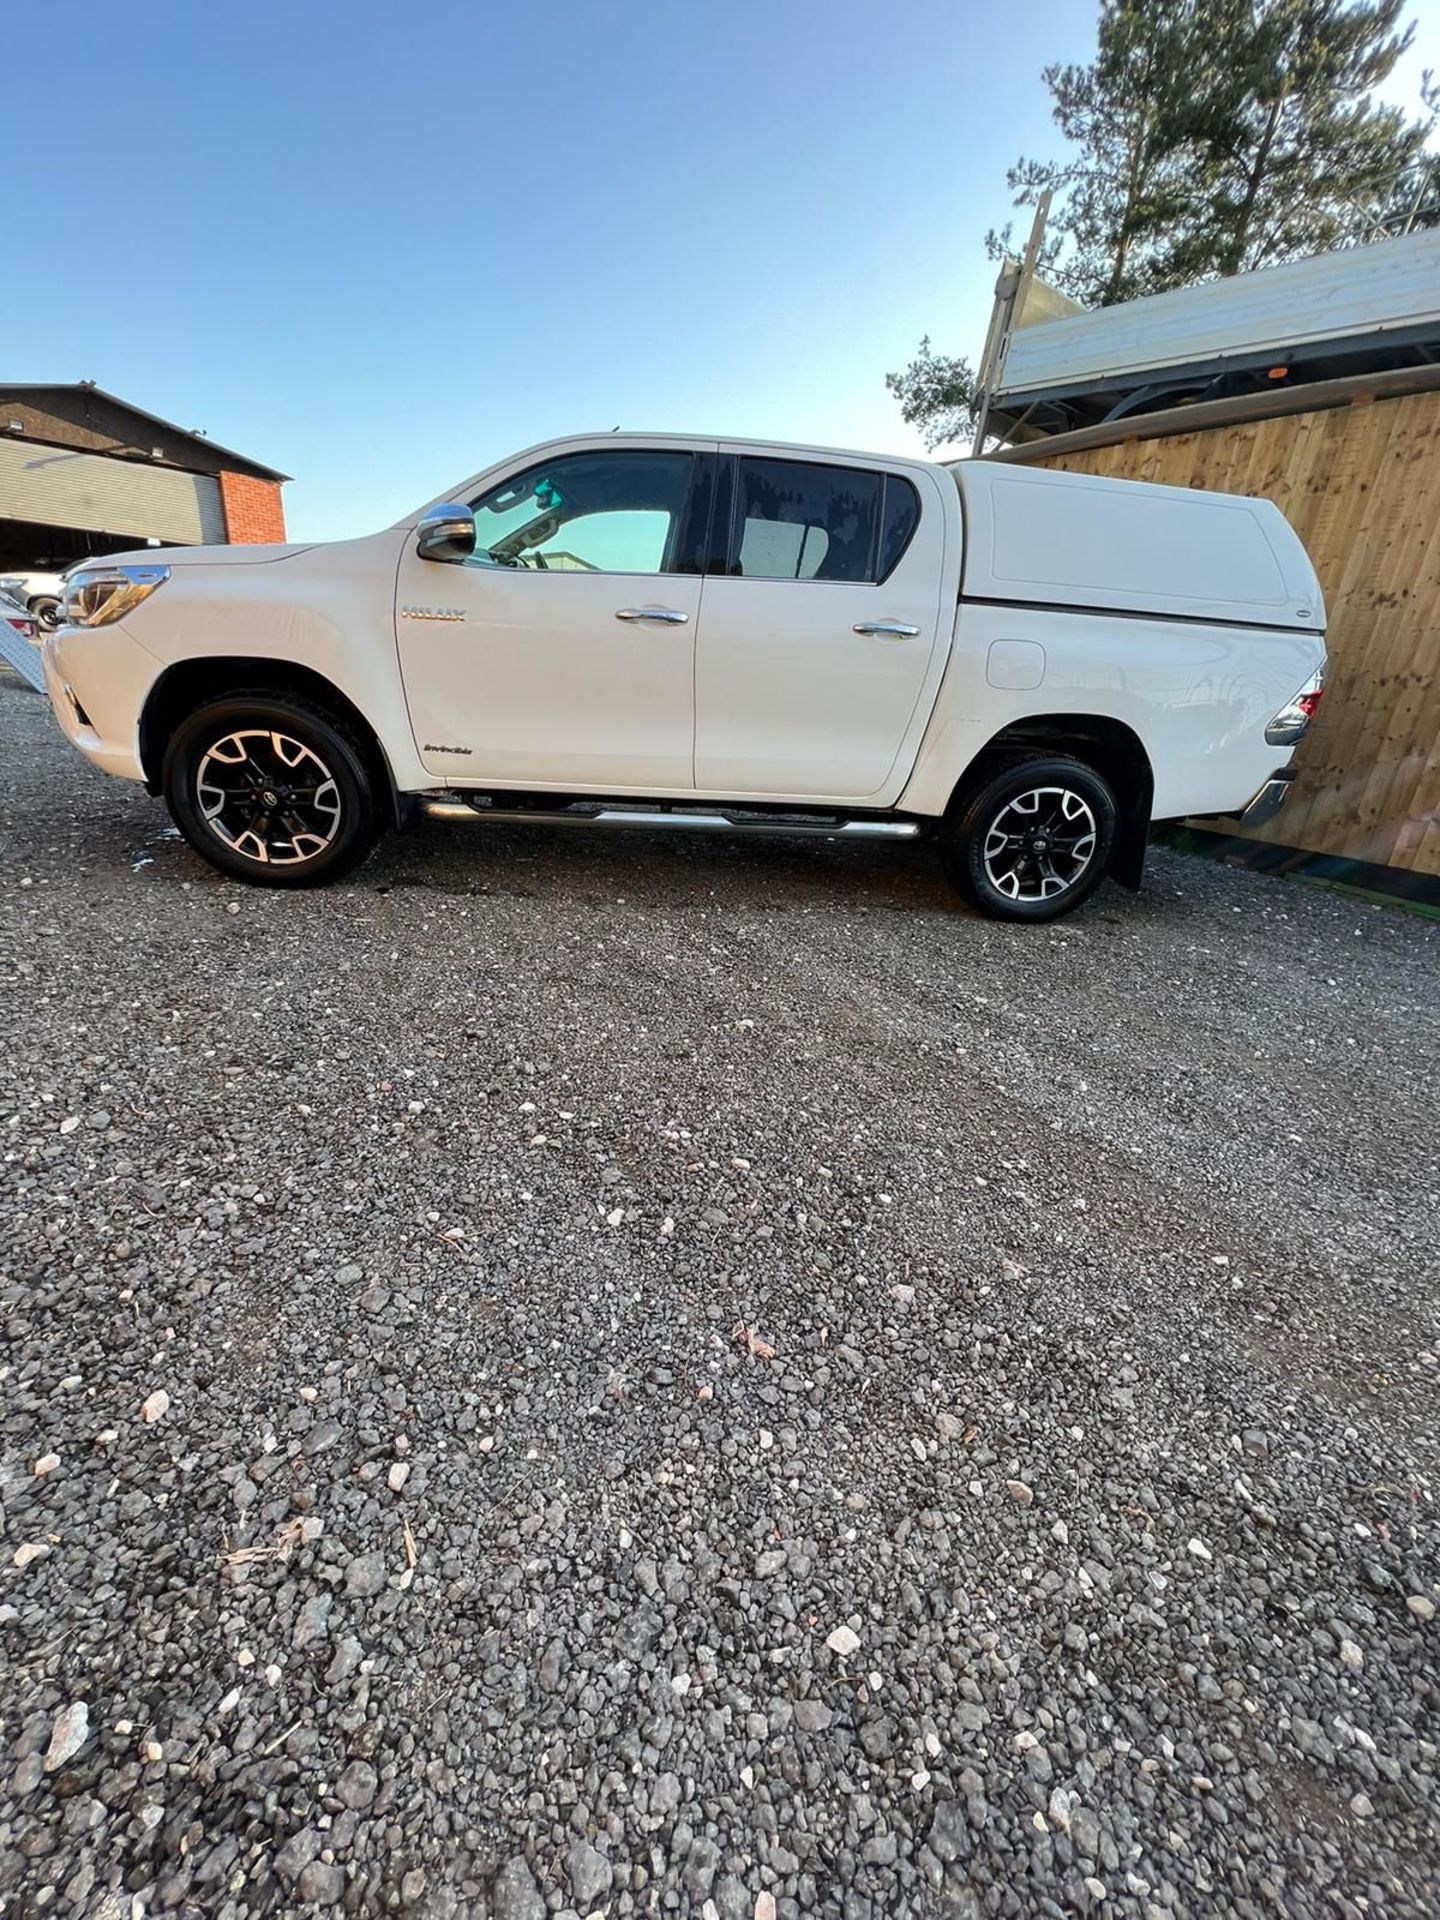 TOYOTA HILUX INVINCIBLE X DOUBLE CAB PICKUP TRUCK 67 REG - Image 2 of 14